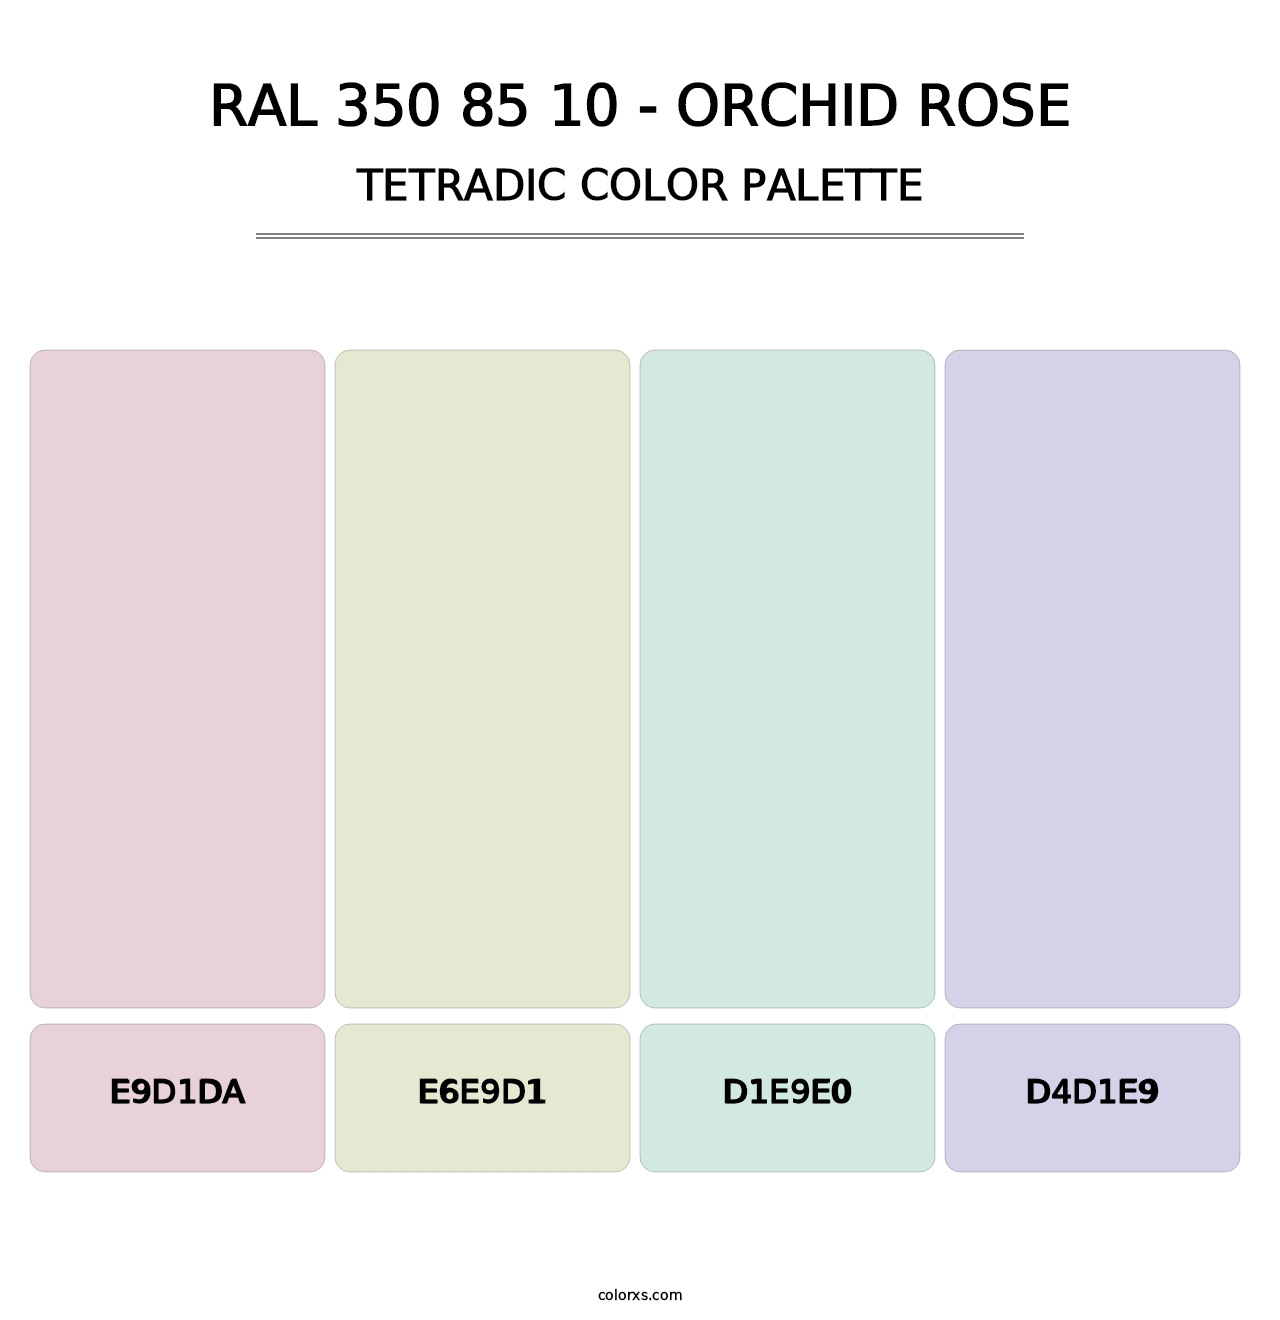 RAL 350 85 10 - Orchid Rose - Tetradic Color Palette